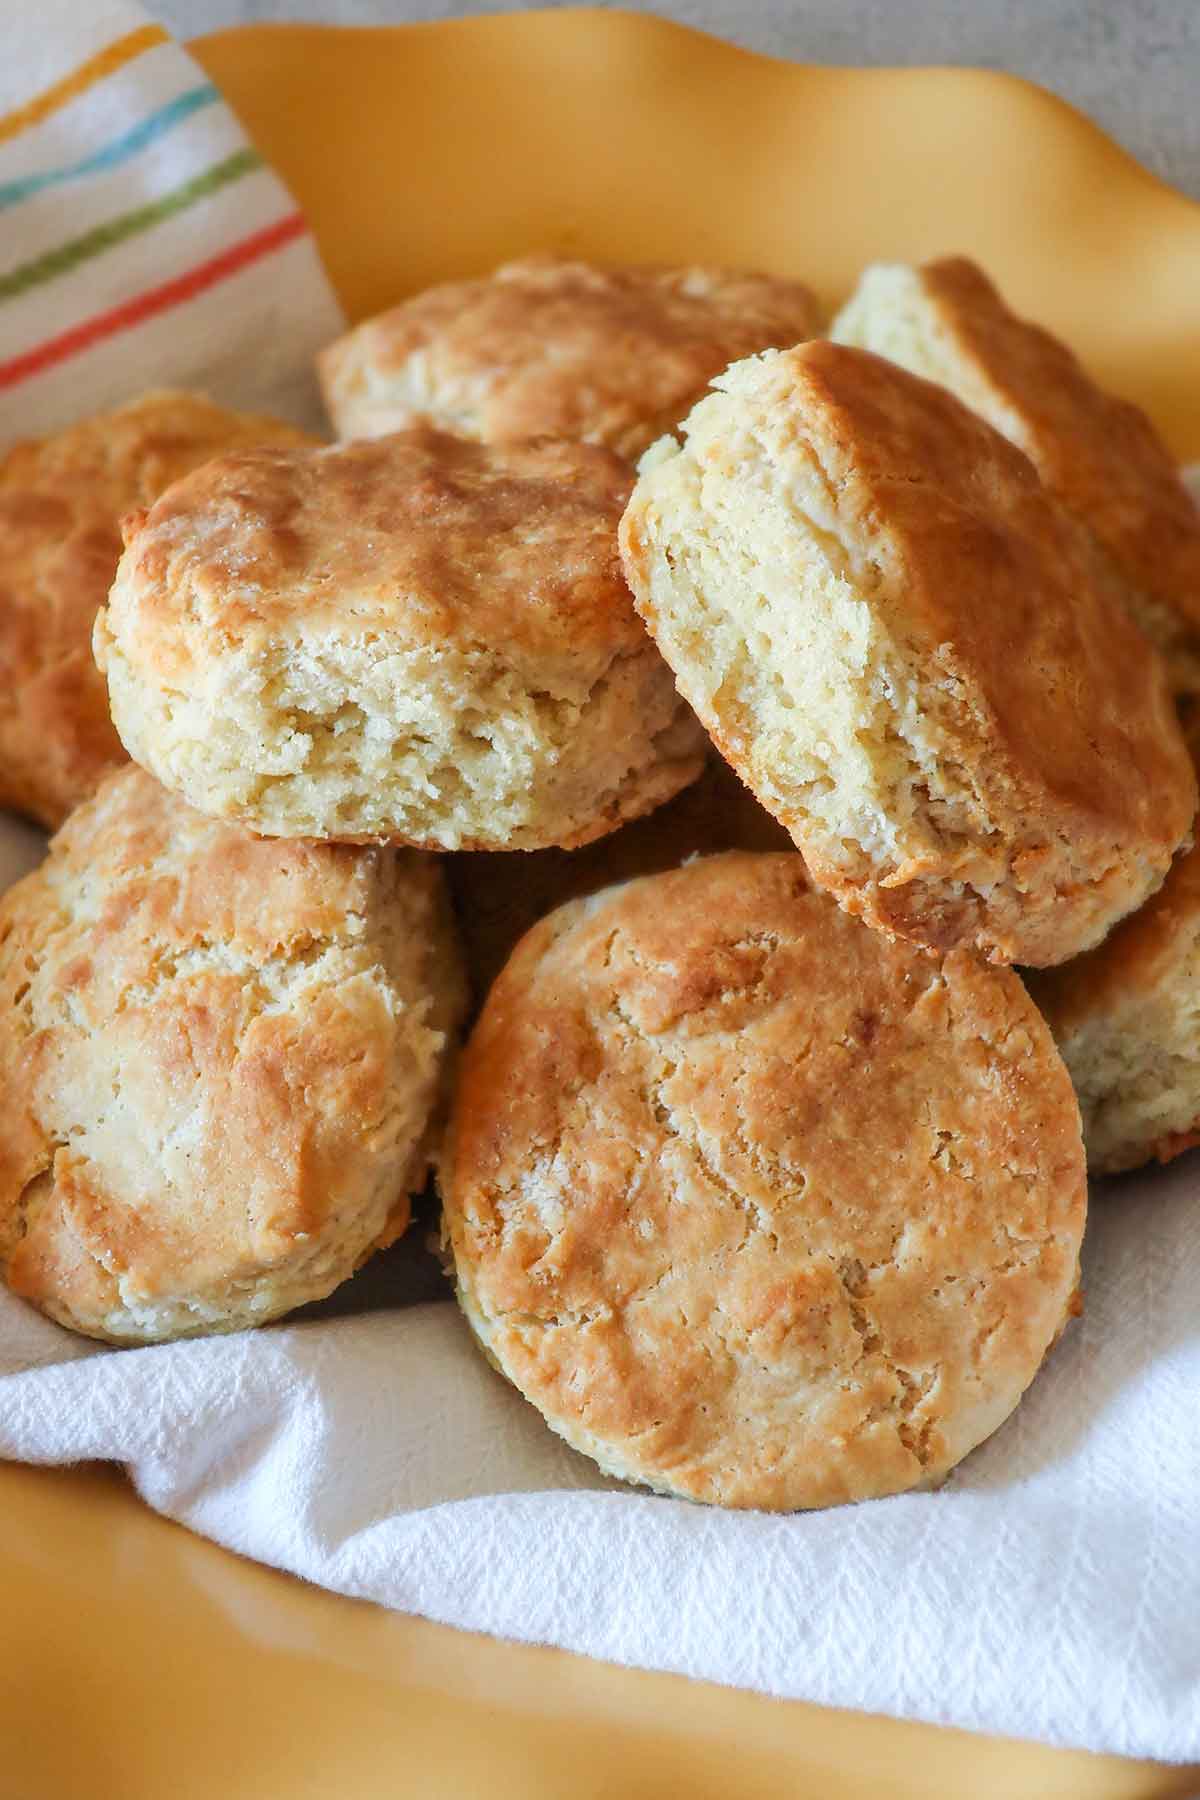 6 gluten free biscuits in a basket lined with kitchen towel